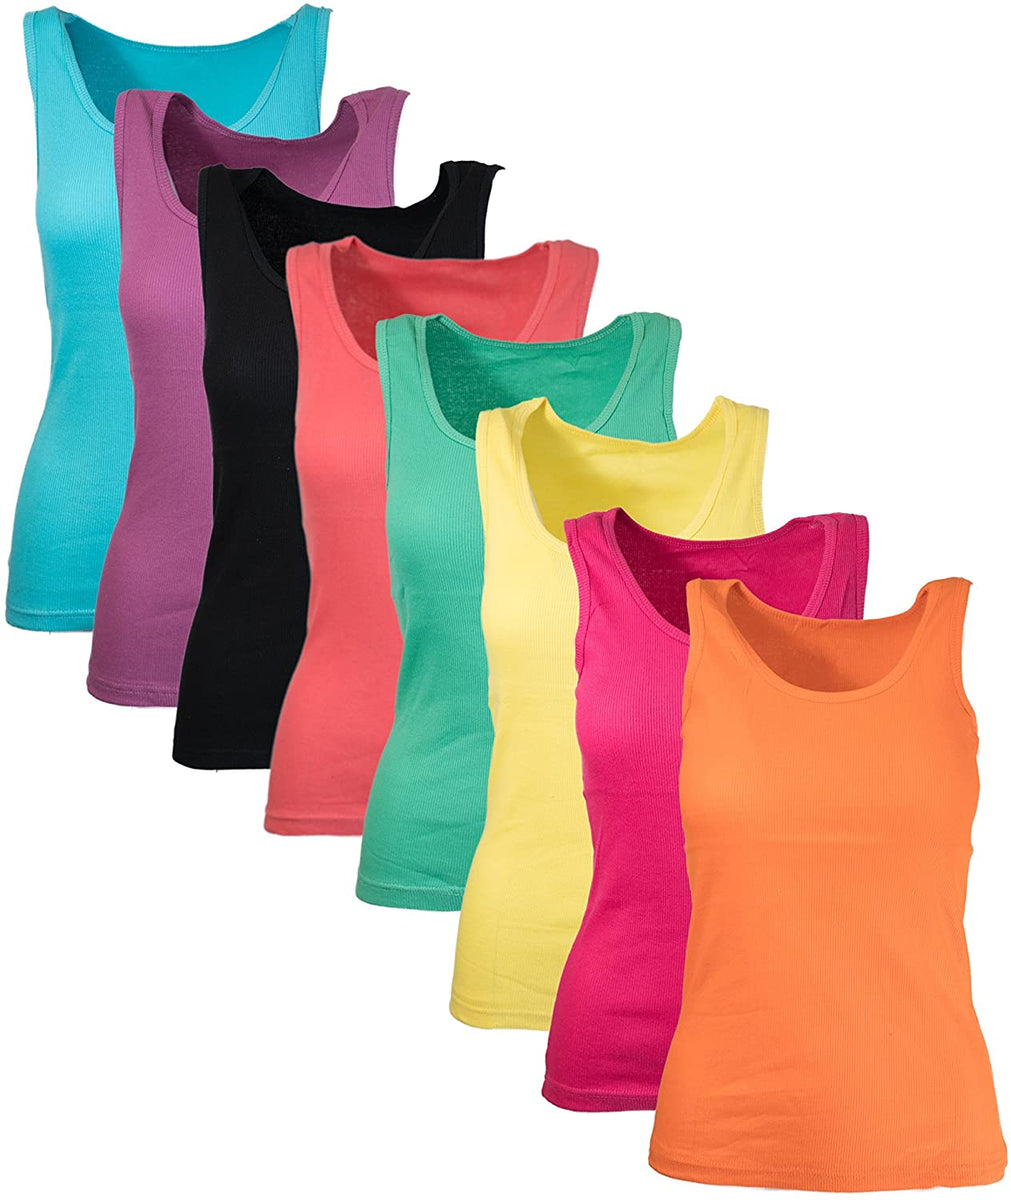 Ribbed Racerback Tank Tops Juniors Sizing Colorful 5-Pack S-XL– Emprella